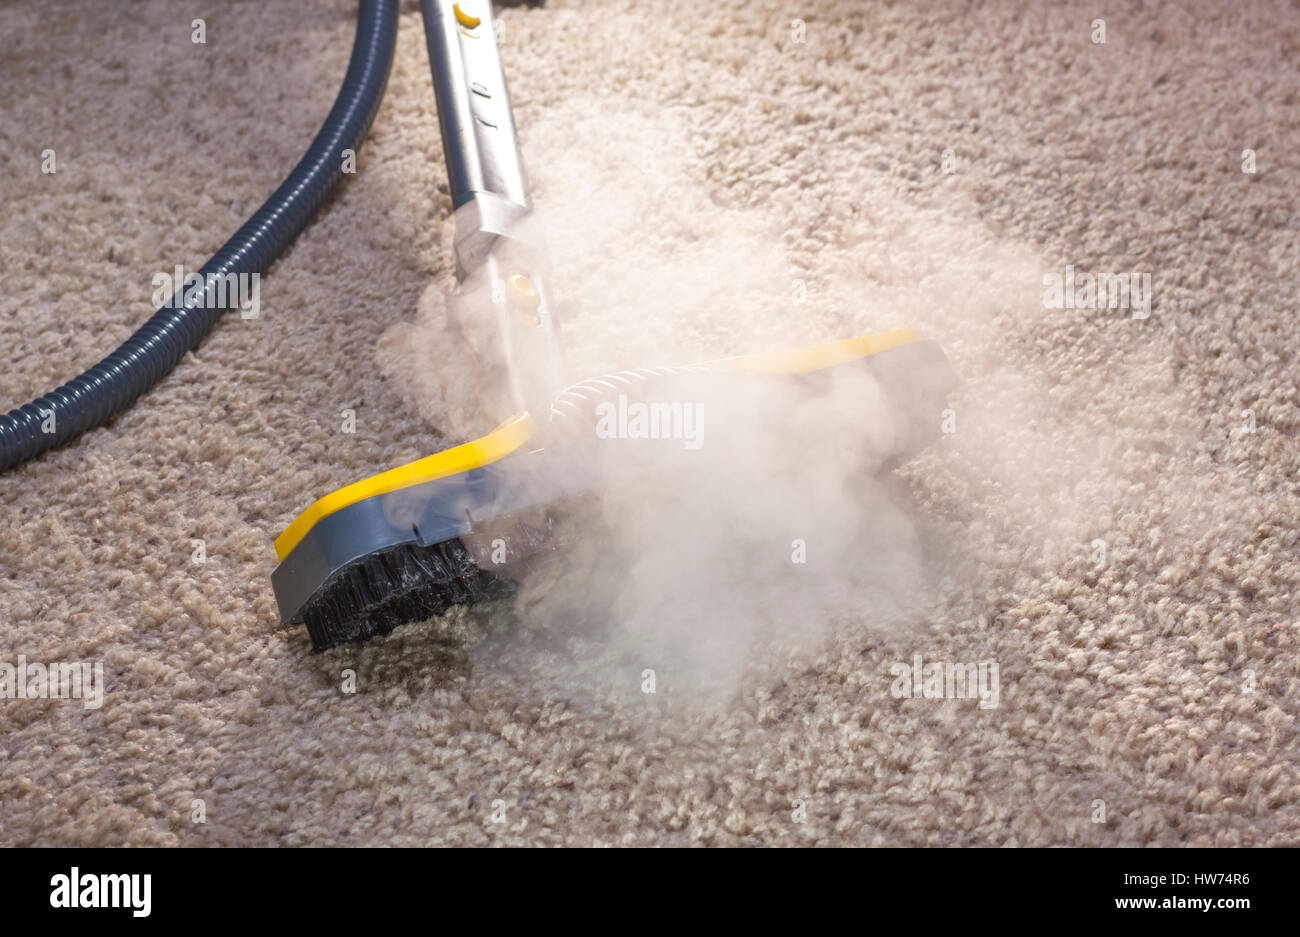 Using dry steam cleaner to sanitize floor carpet. Stock Photo